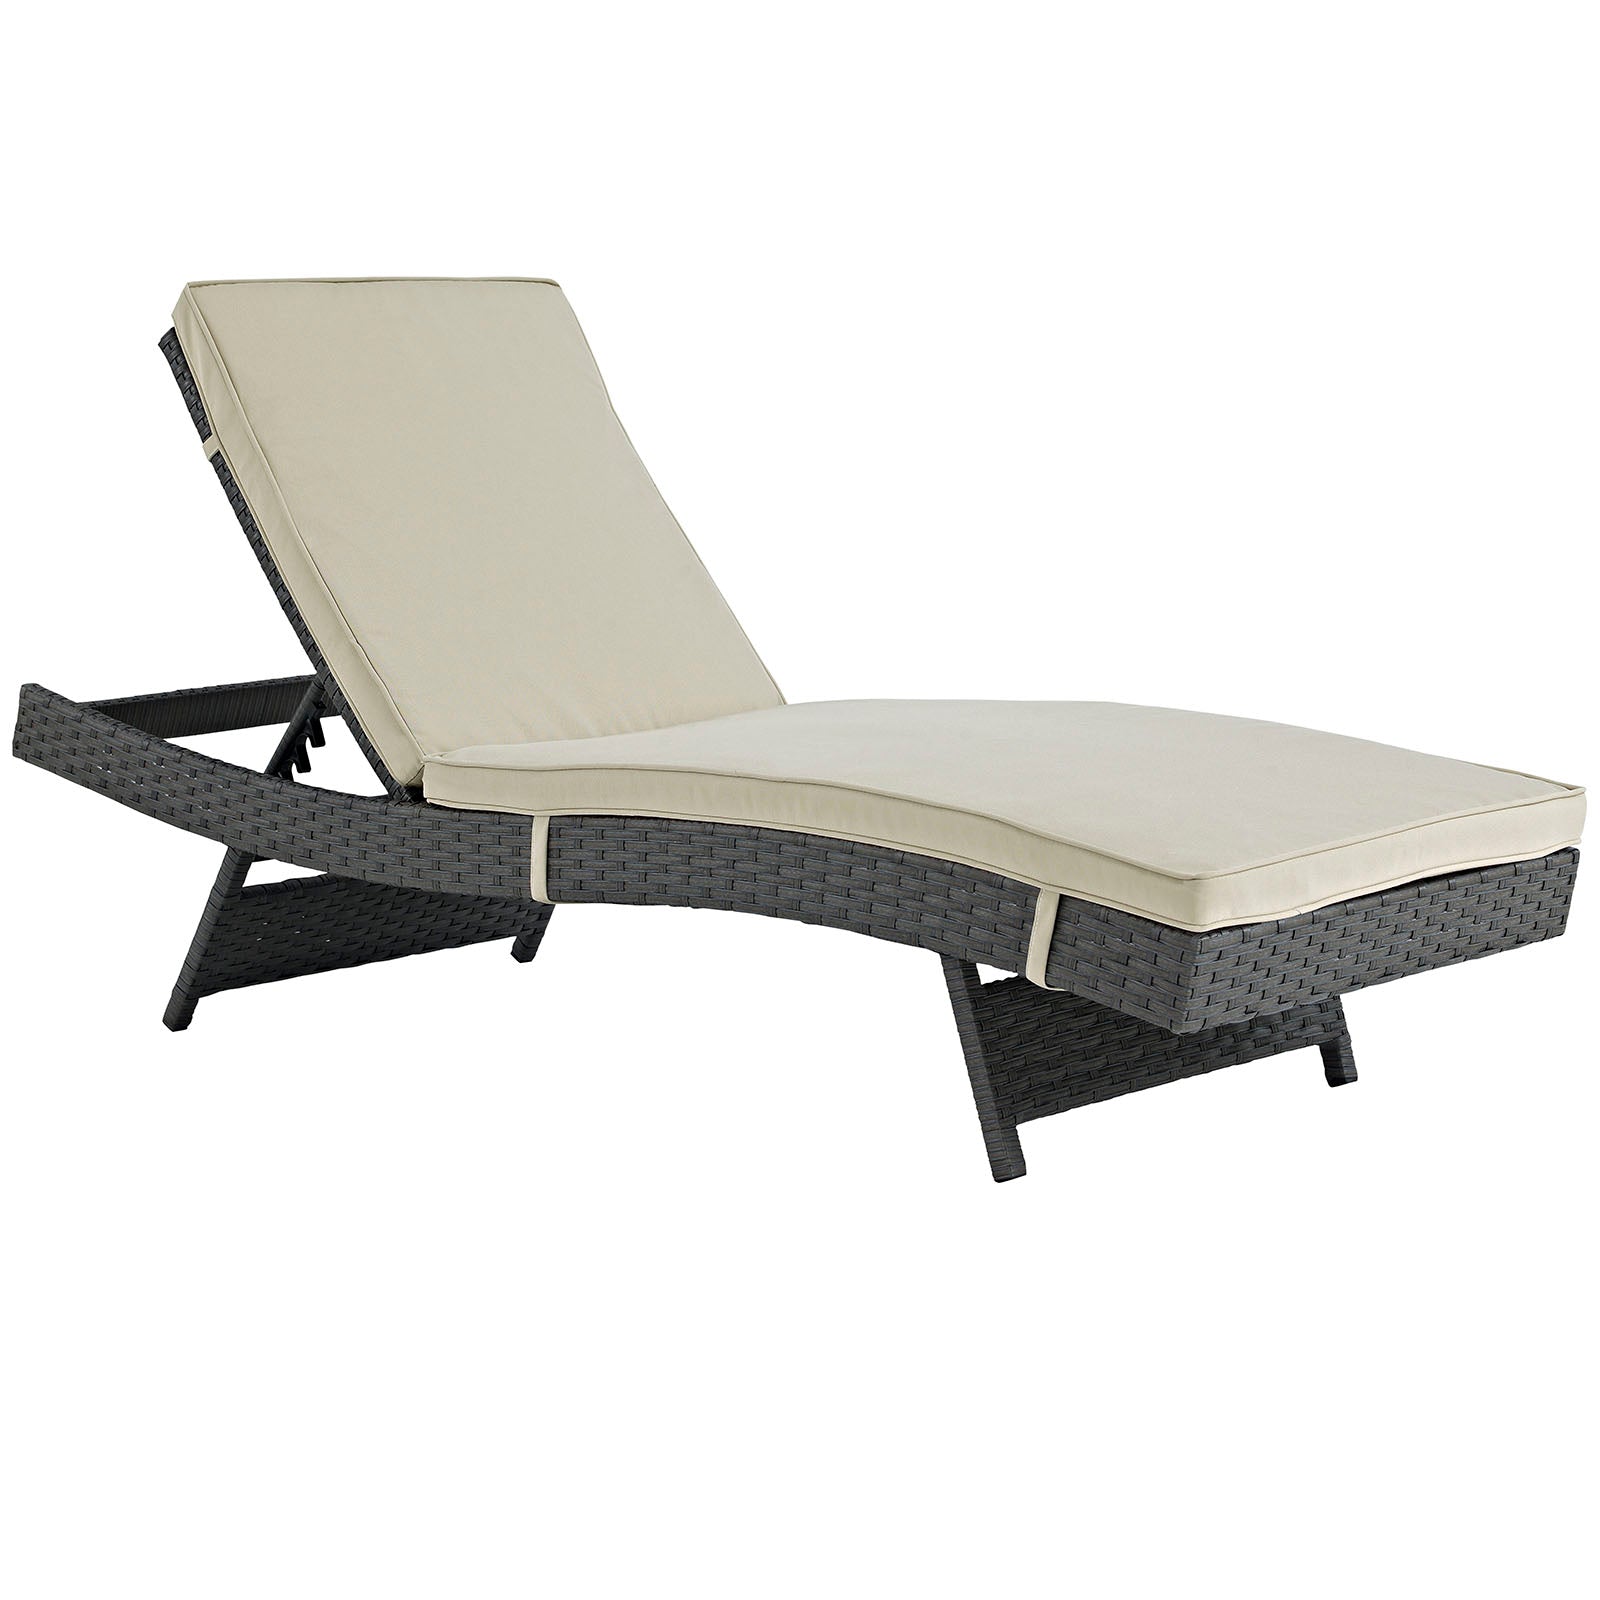 Modway Outdoor Loungers - Sojourn Outdoor Patio Sunbrella Chaise Antique Canvas Beige